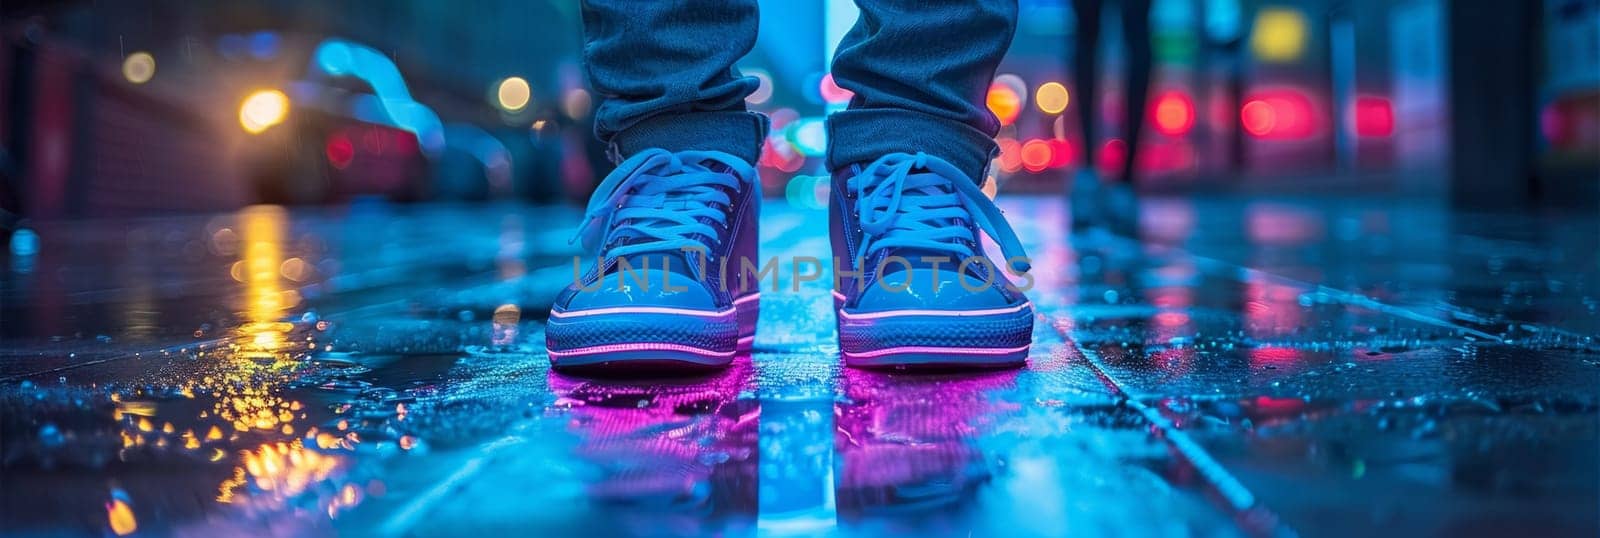 A person wearing bright blue shoes standing in a puddle of water